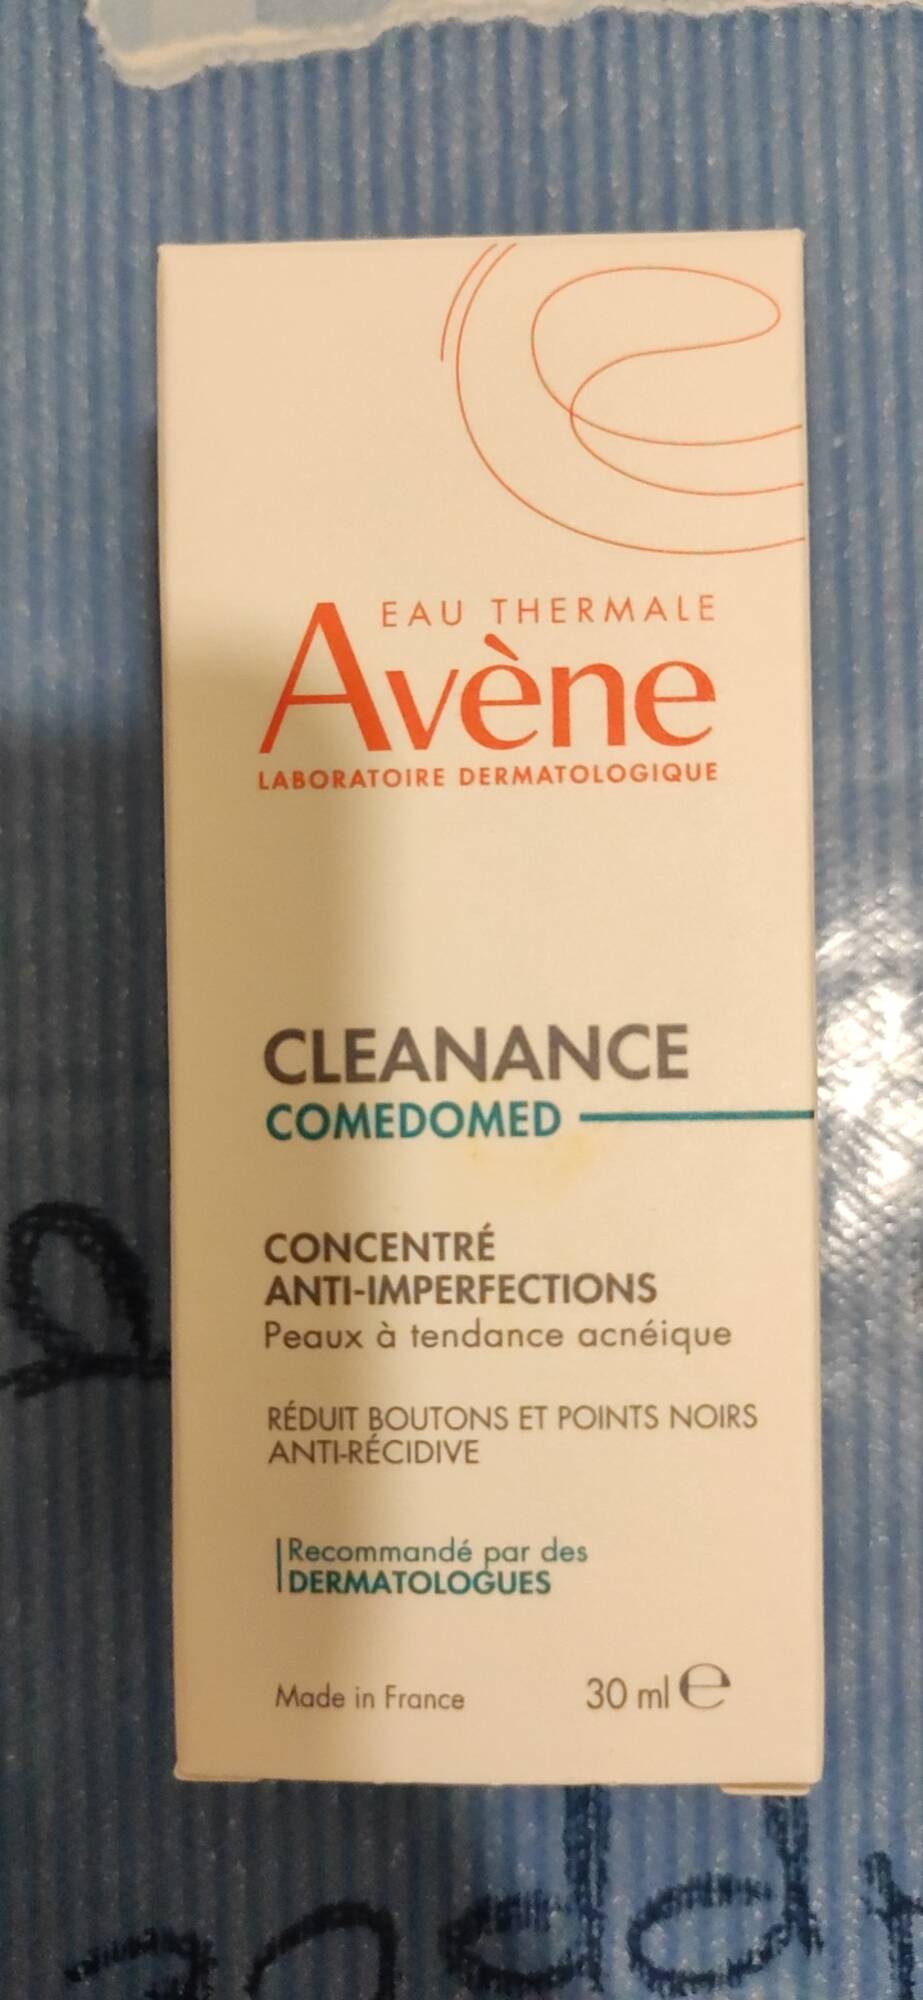 EAU THERMALE AVÈNE - Cleanance comedomed_anti-imperfections